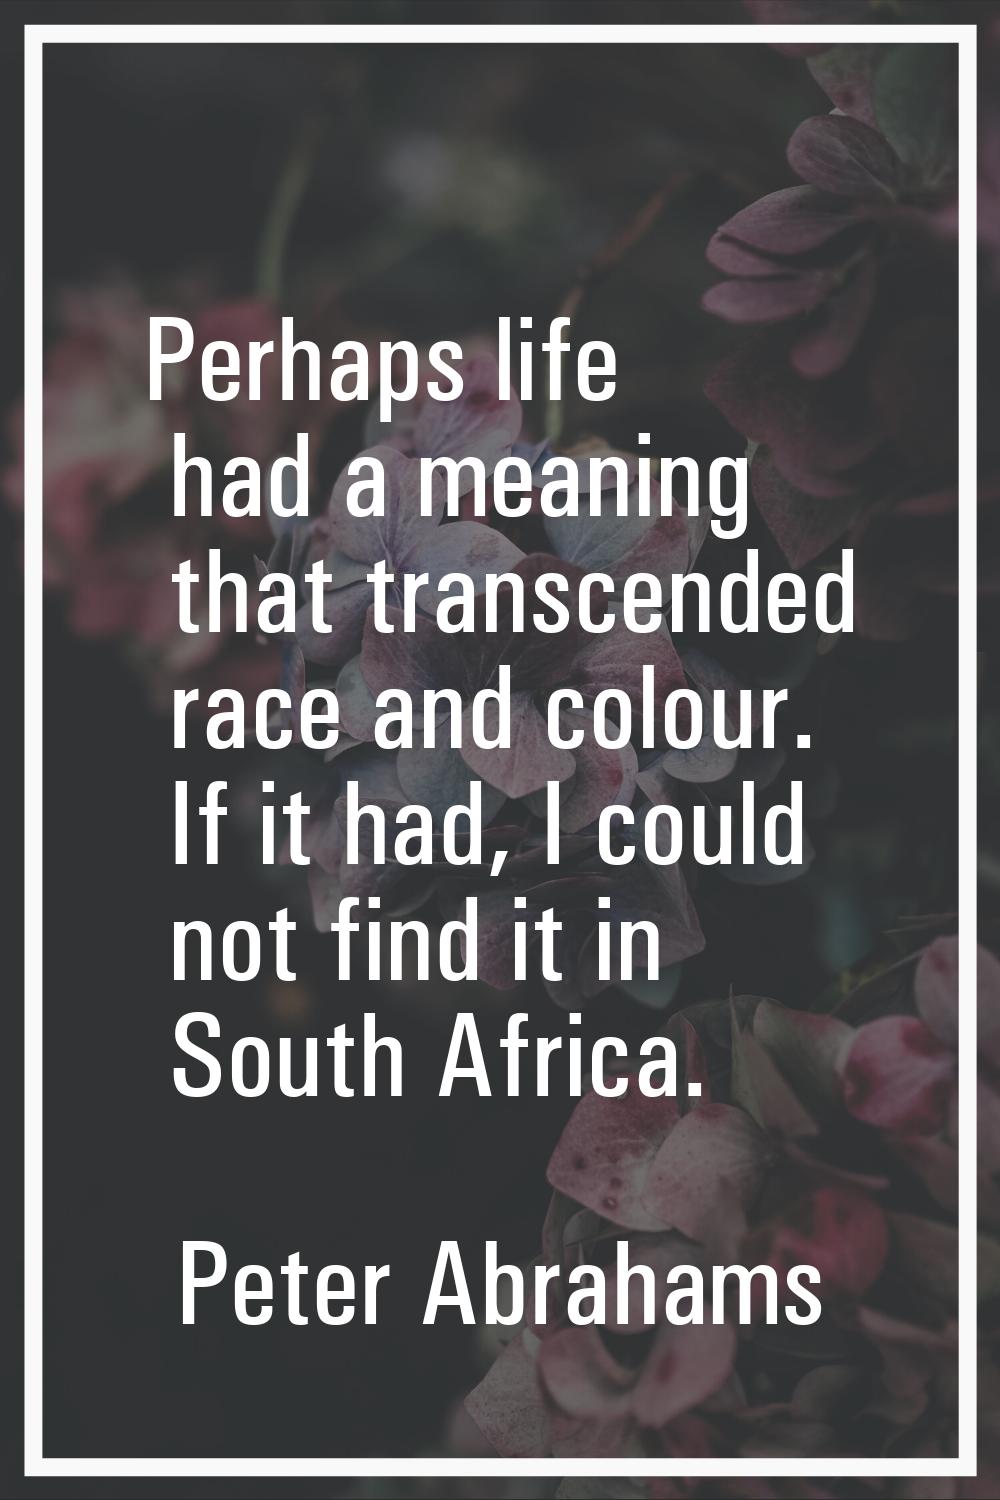 Perhaps life had a meaning that transcended race and colour. If it had, I could not find it in Sout